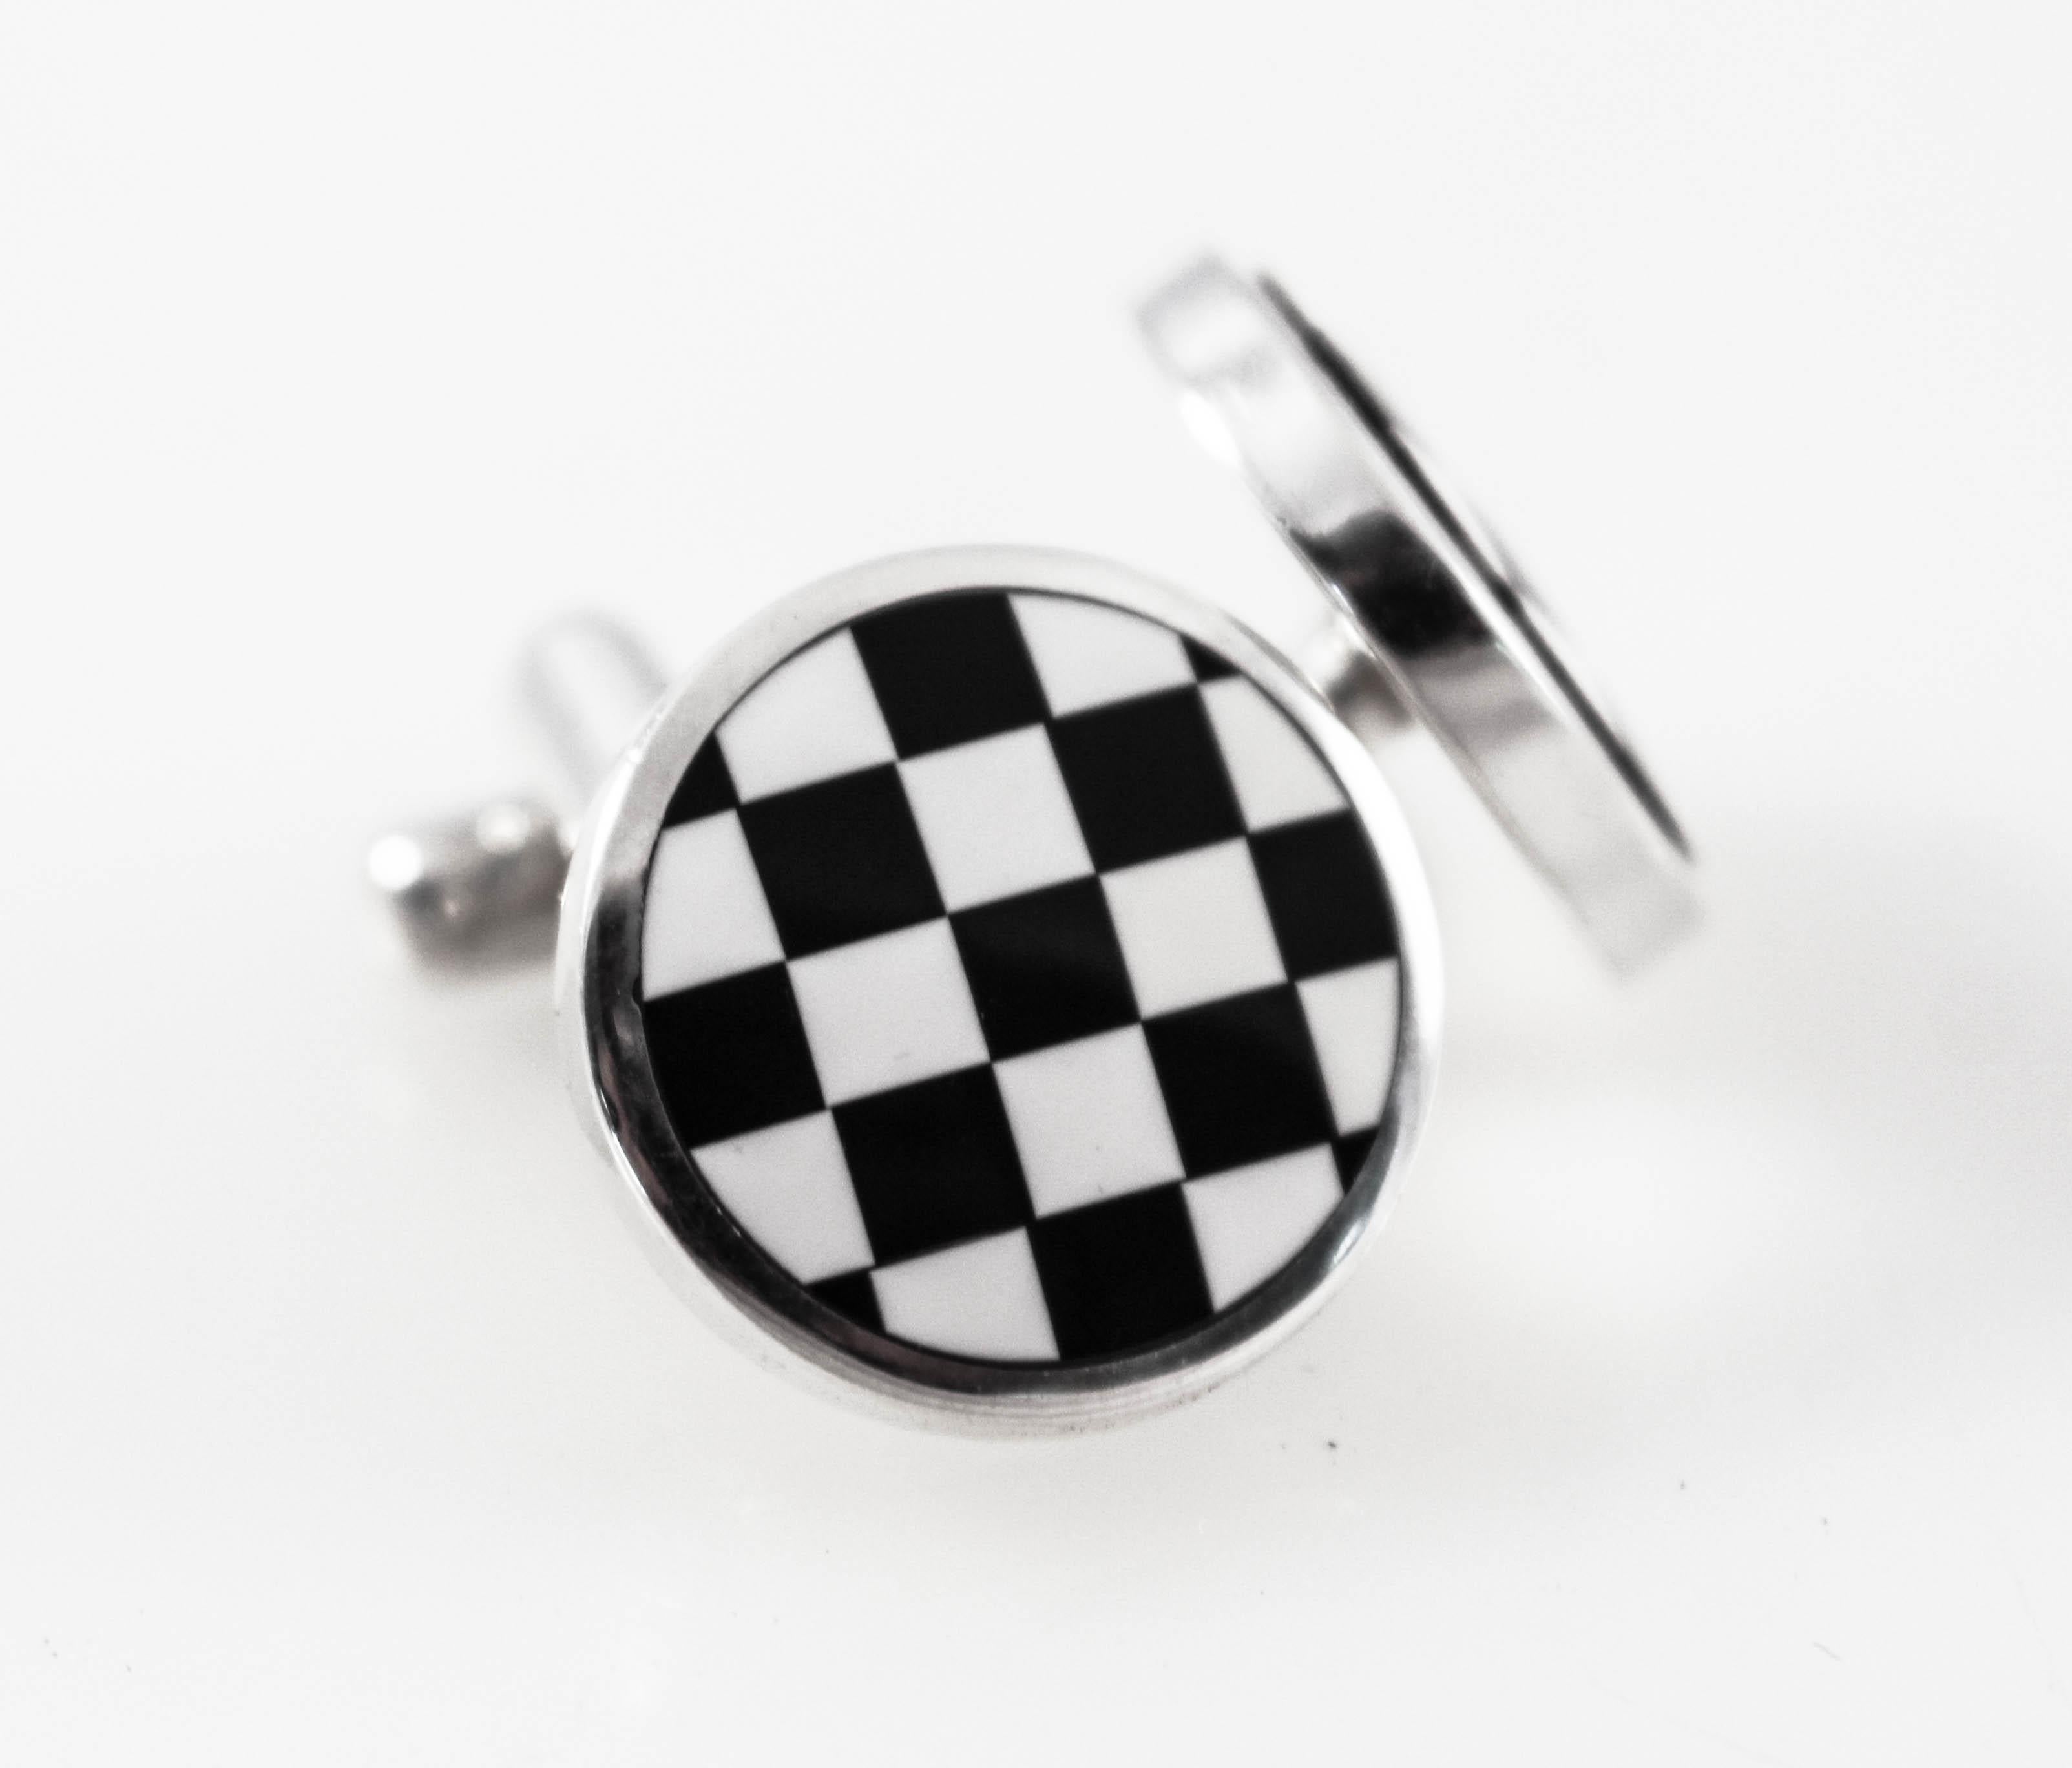 Just in time for Father’s Day and/or graduation, we are offering these sterling silver cufflinks. Made in England, they are black onyx and mother of pearl. They have a checkered design giving them a young almost playful feel. Give that special man